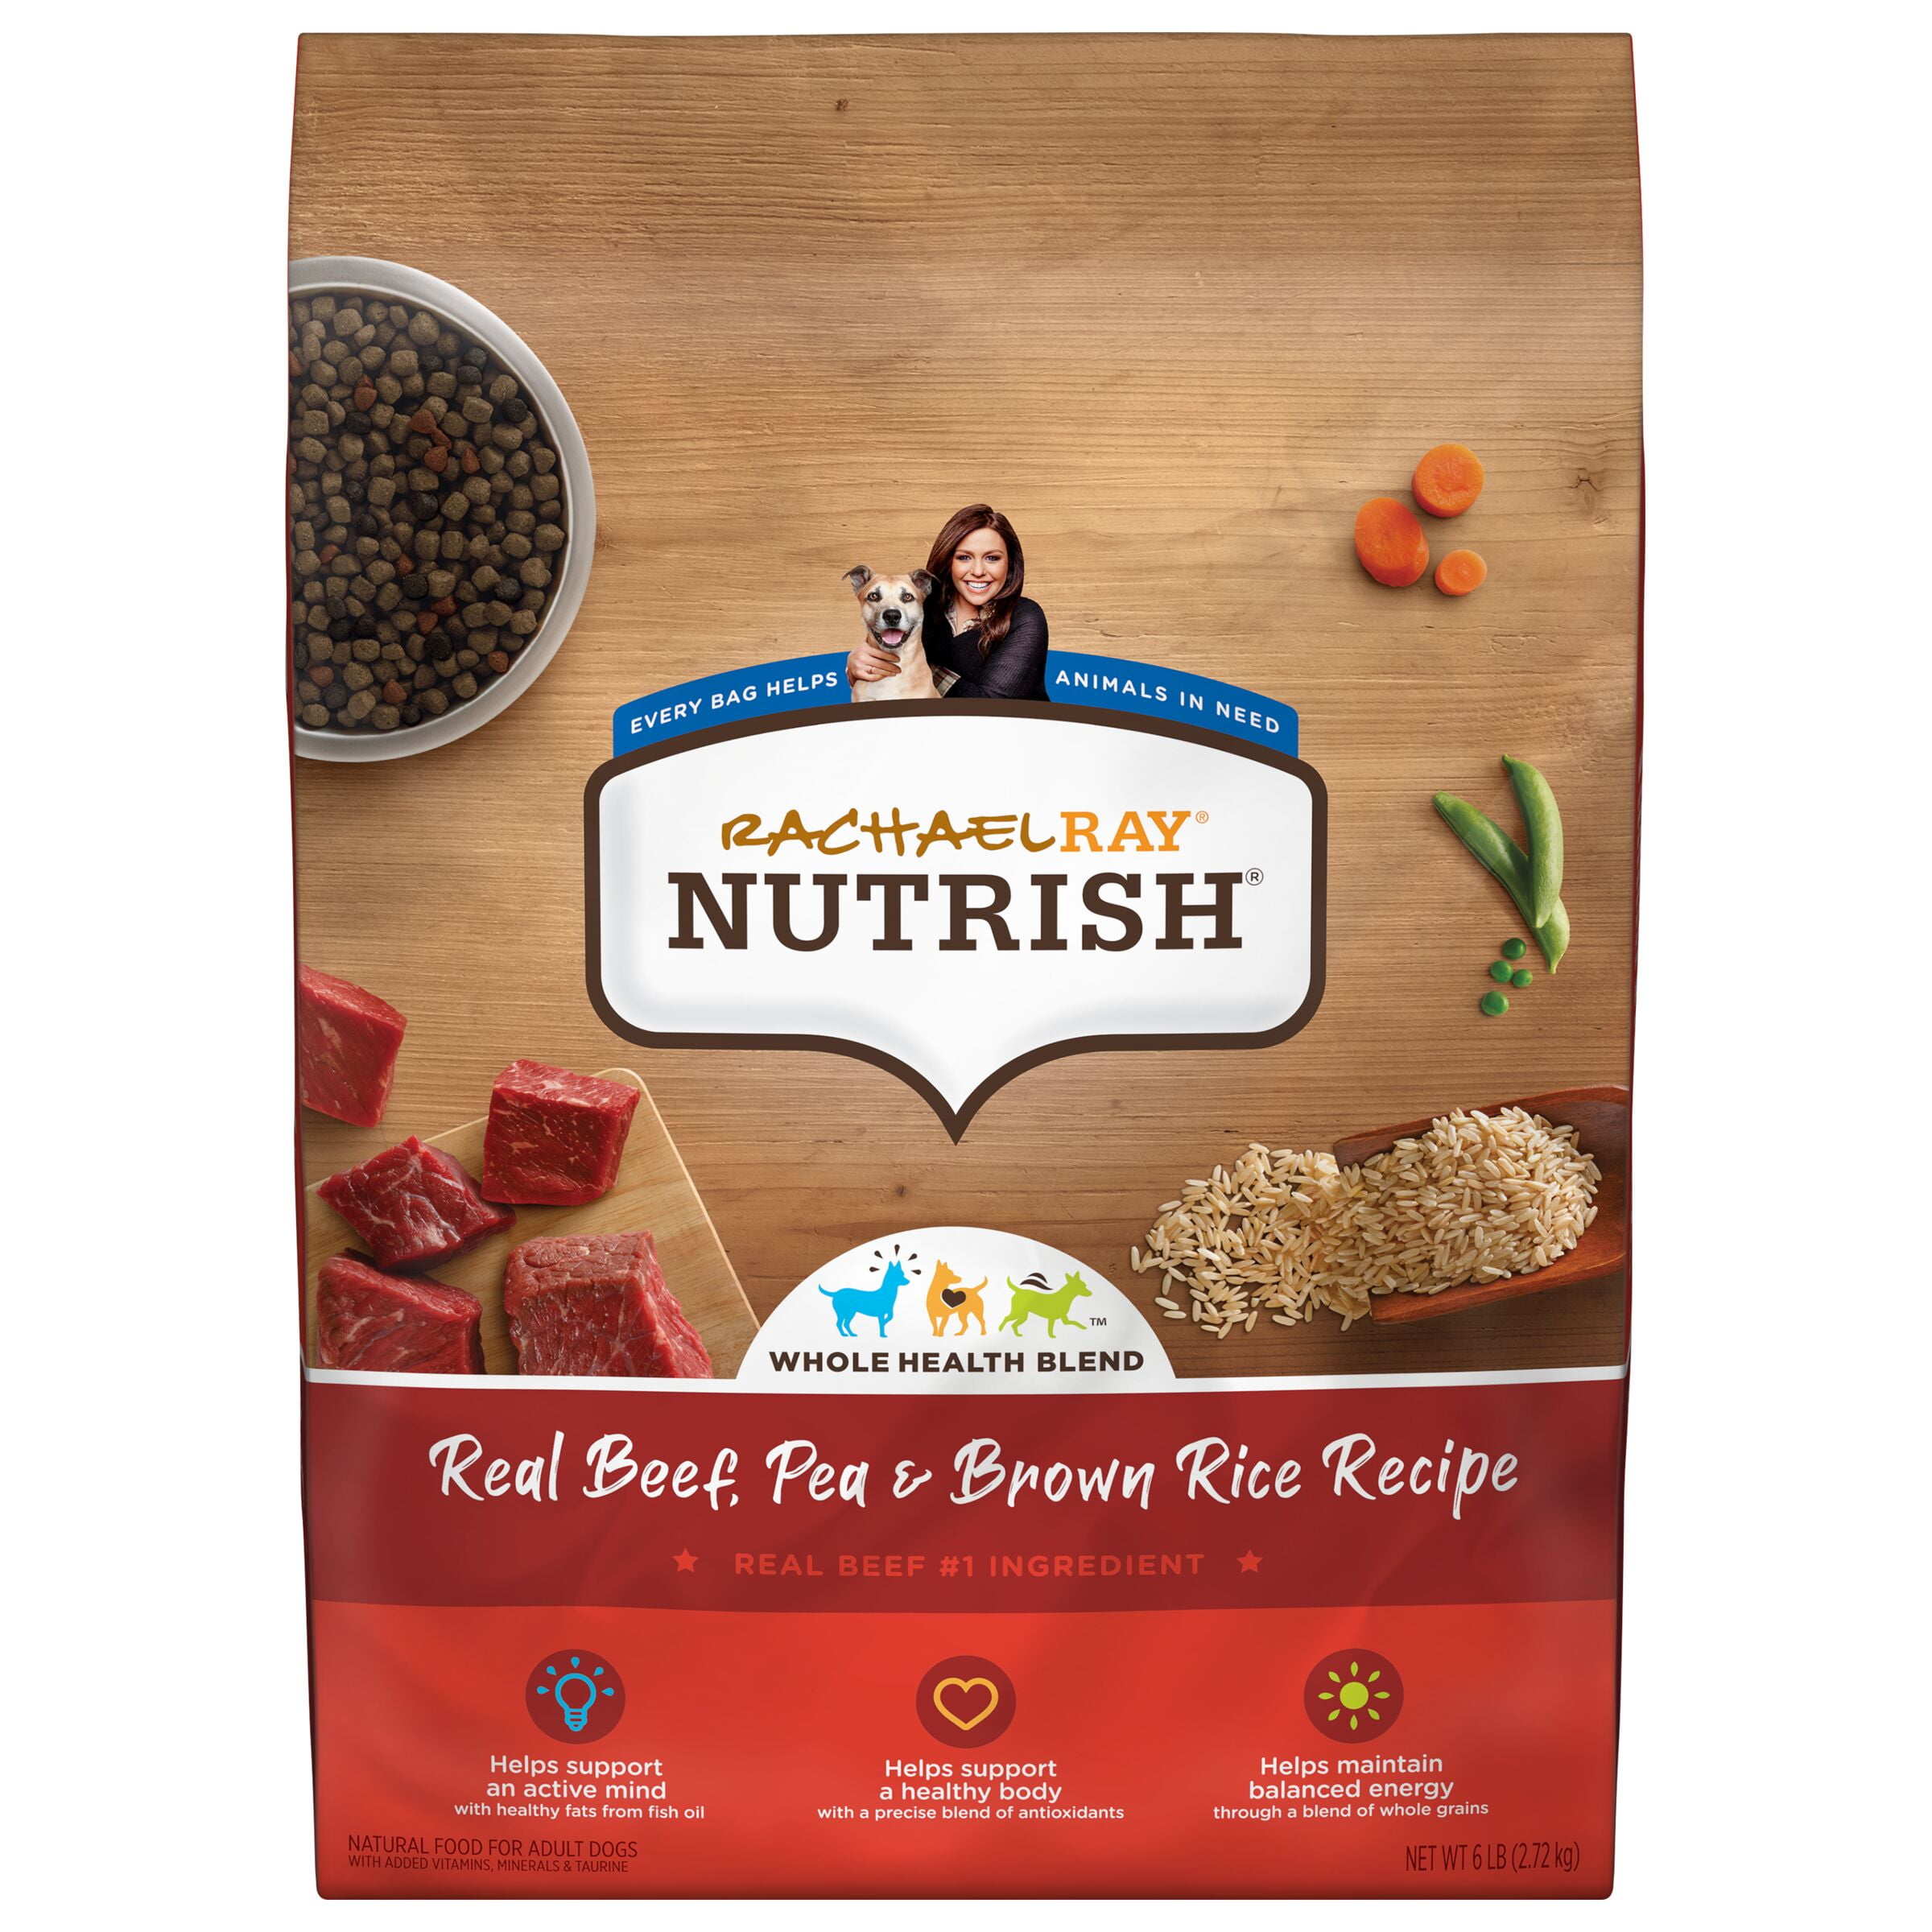 Rachael Ray Nutrish Real Beef, Pea & Brown Rice Recipe Dry Dog Food, 6 lb. Bag (Packaging May Vary)